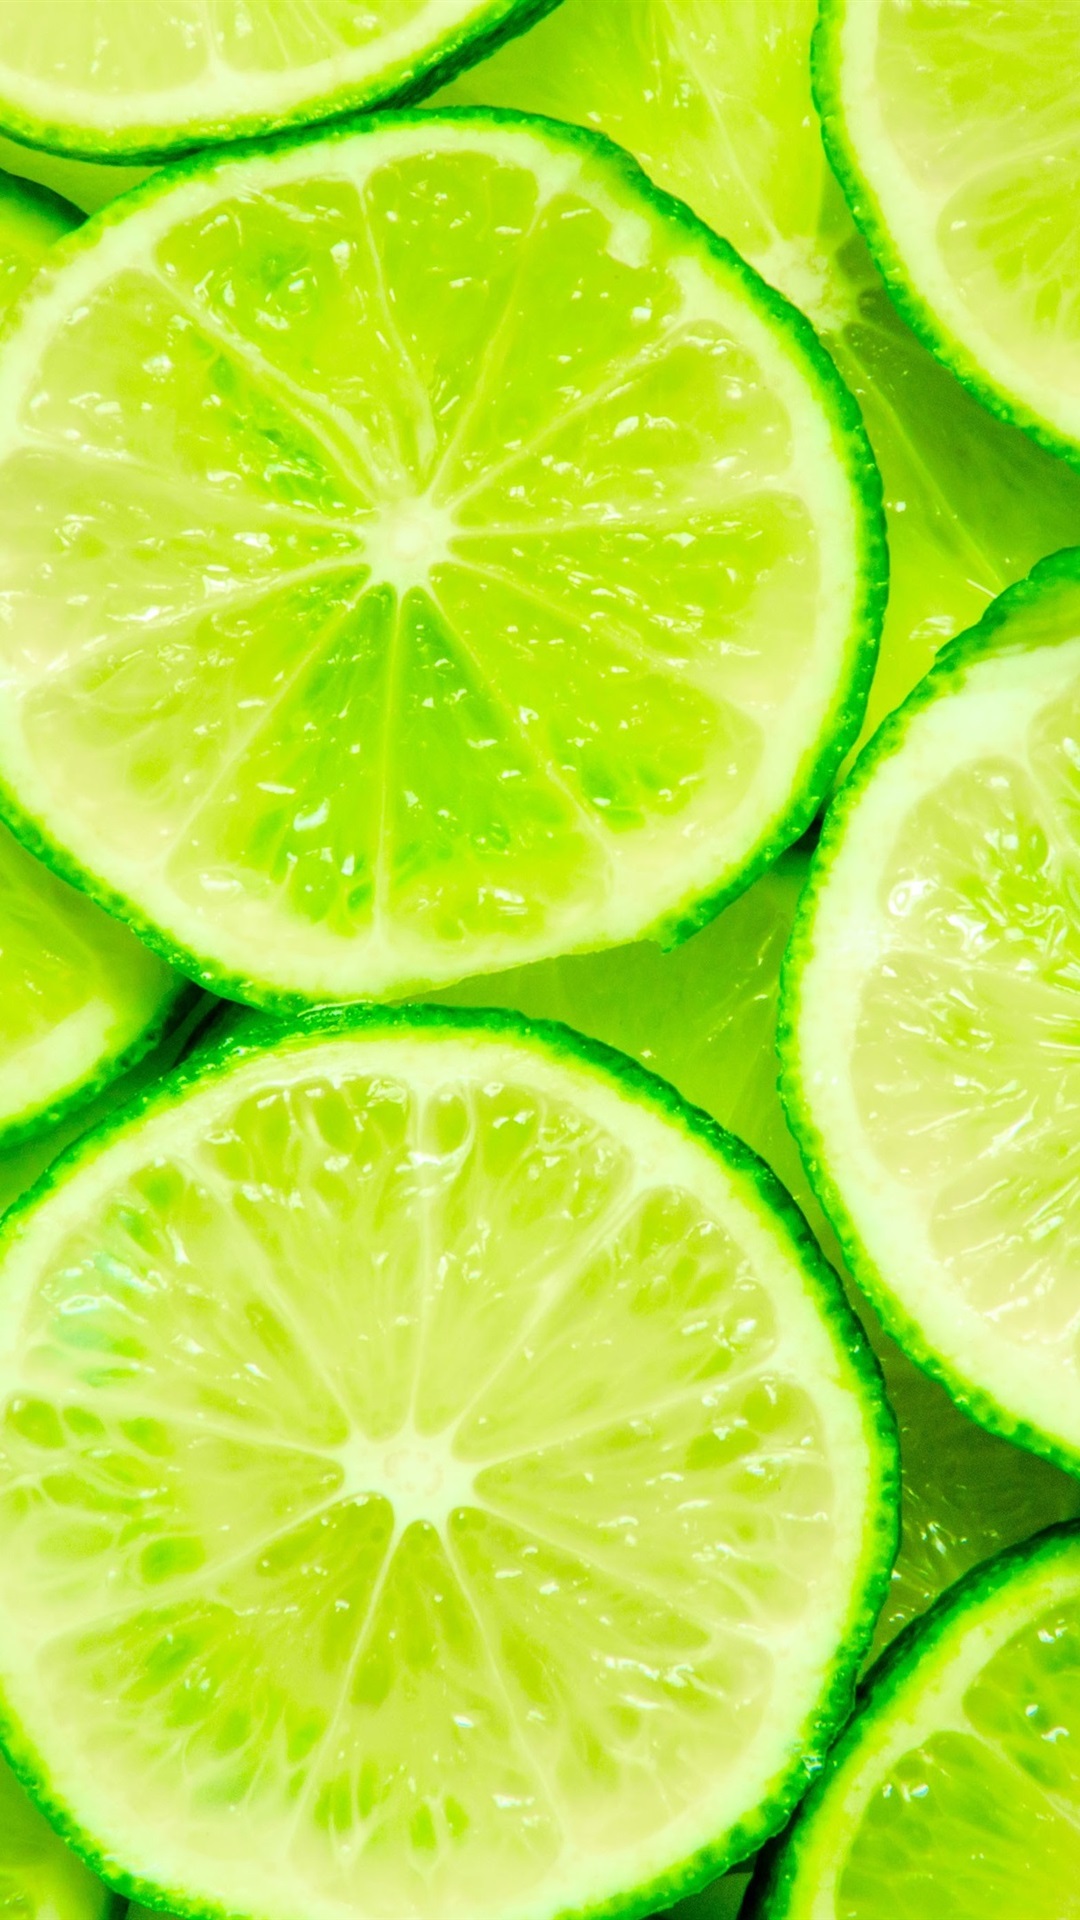 Green Lemon Slices Close Up 1080x1920 IPhone 8 7 6 6S Plus Wallpaper, Background, Picture, Image